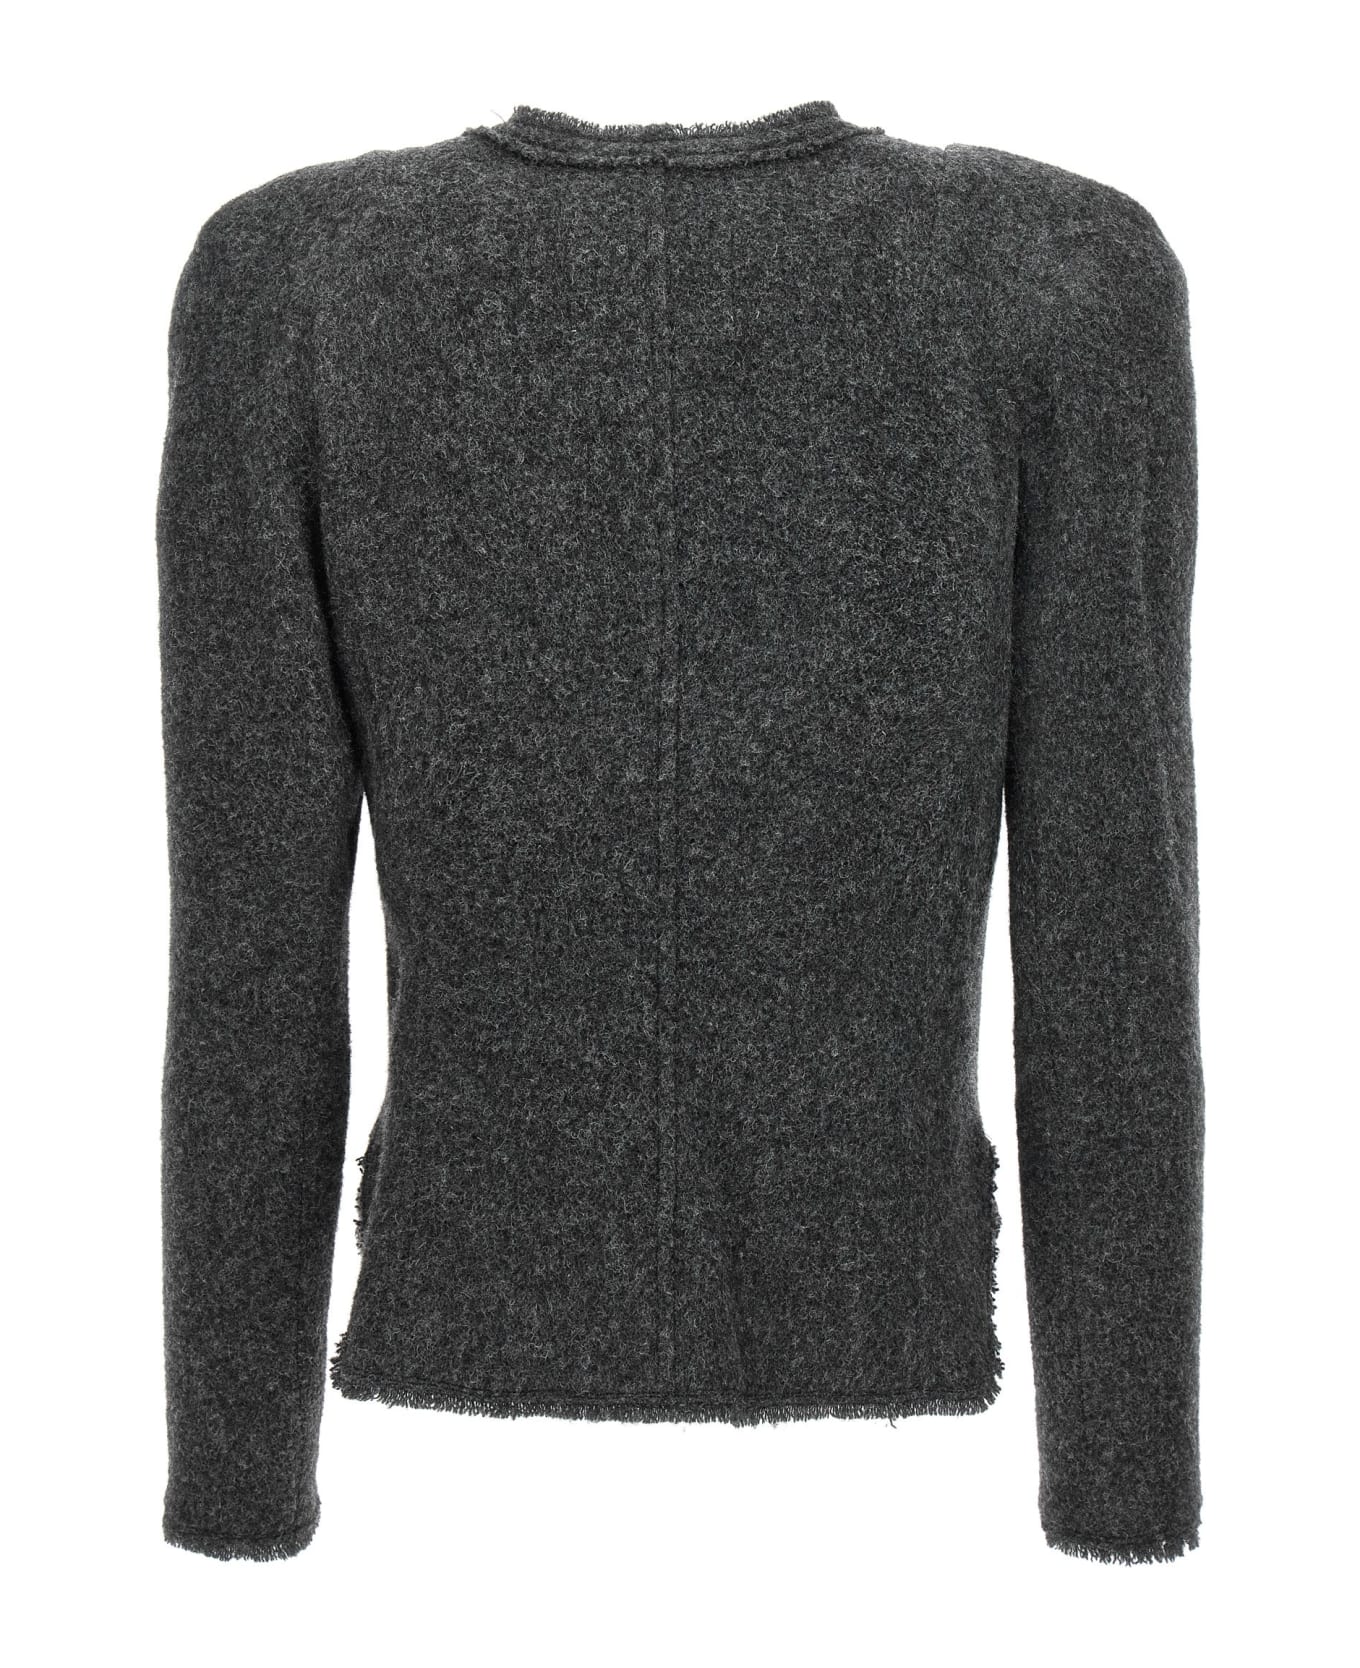 Marant Étoile Buttoned Knitted Cardigan - Gray ジャケット